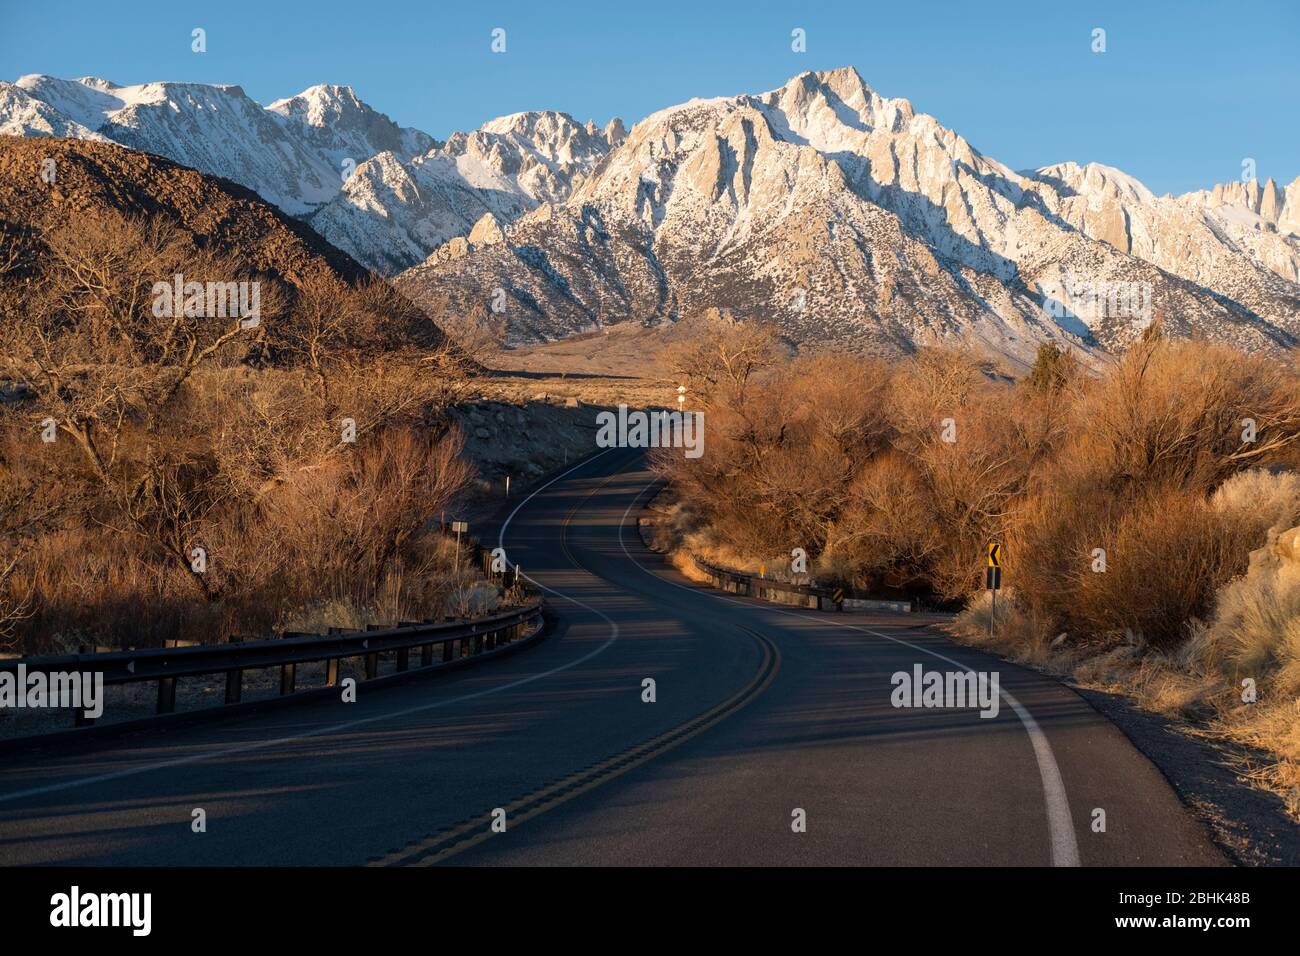 Highway approach to Mt. Whitney in Inyo National Forest near Lone Pine, California Stock Photo